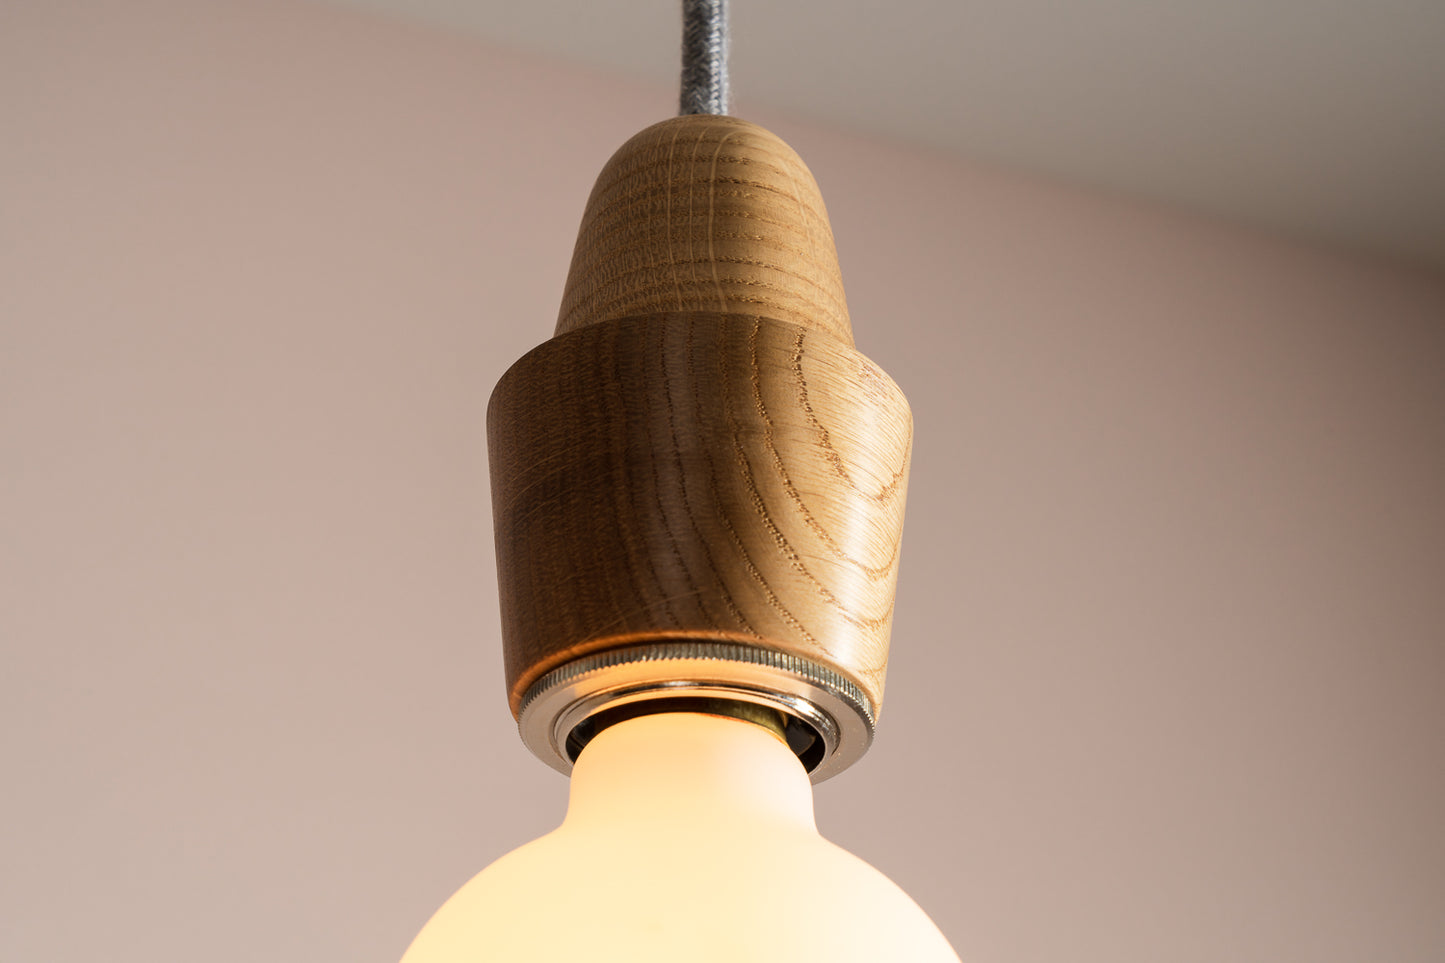 Wooden Element pendant light fixture with linen cable and solid oak ceiling rose.